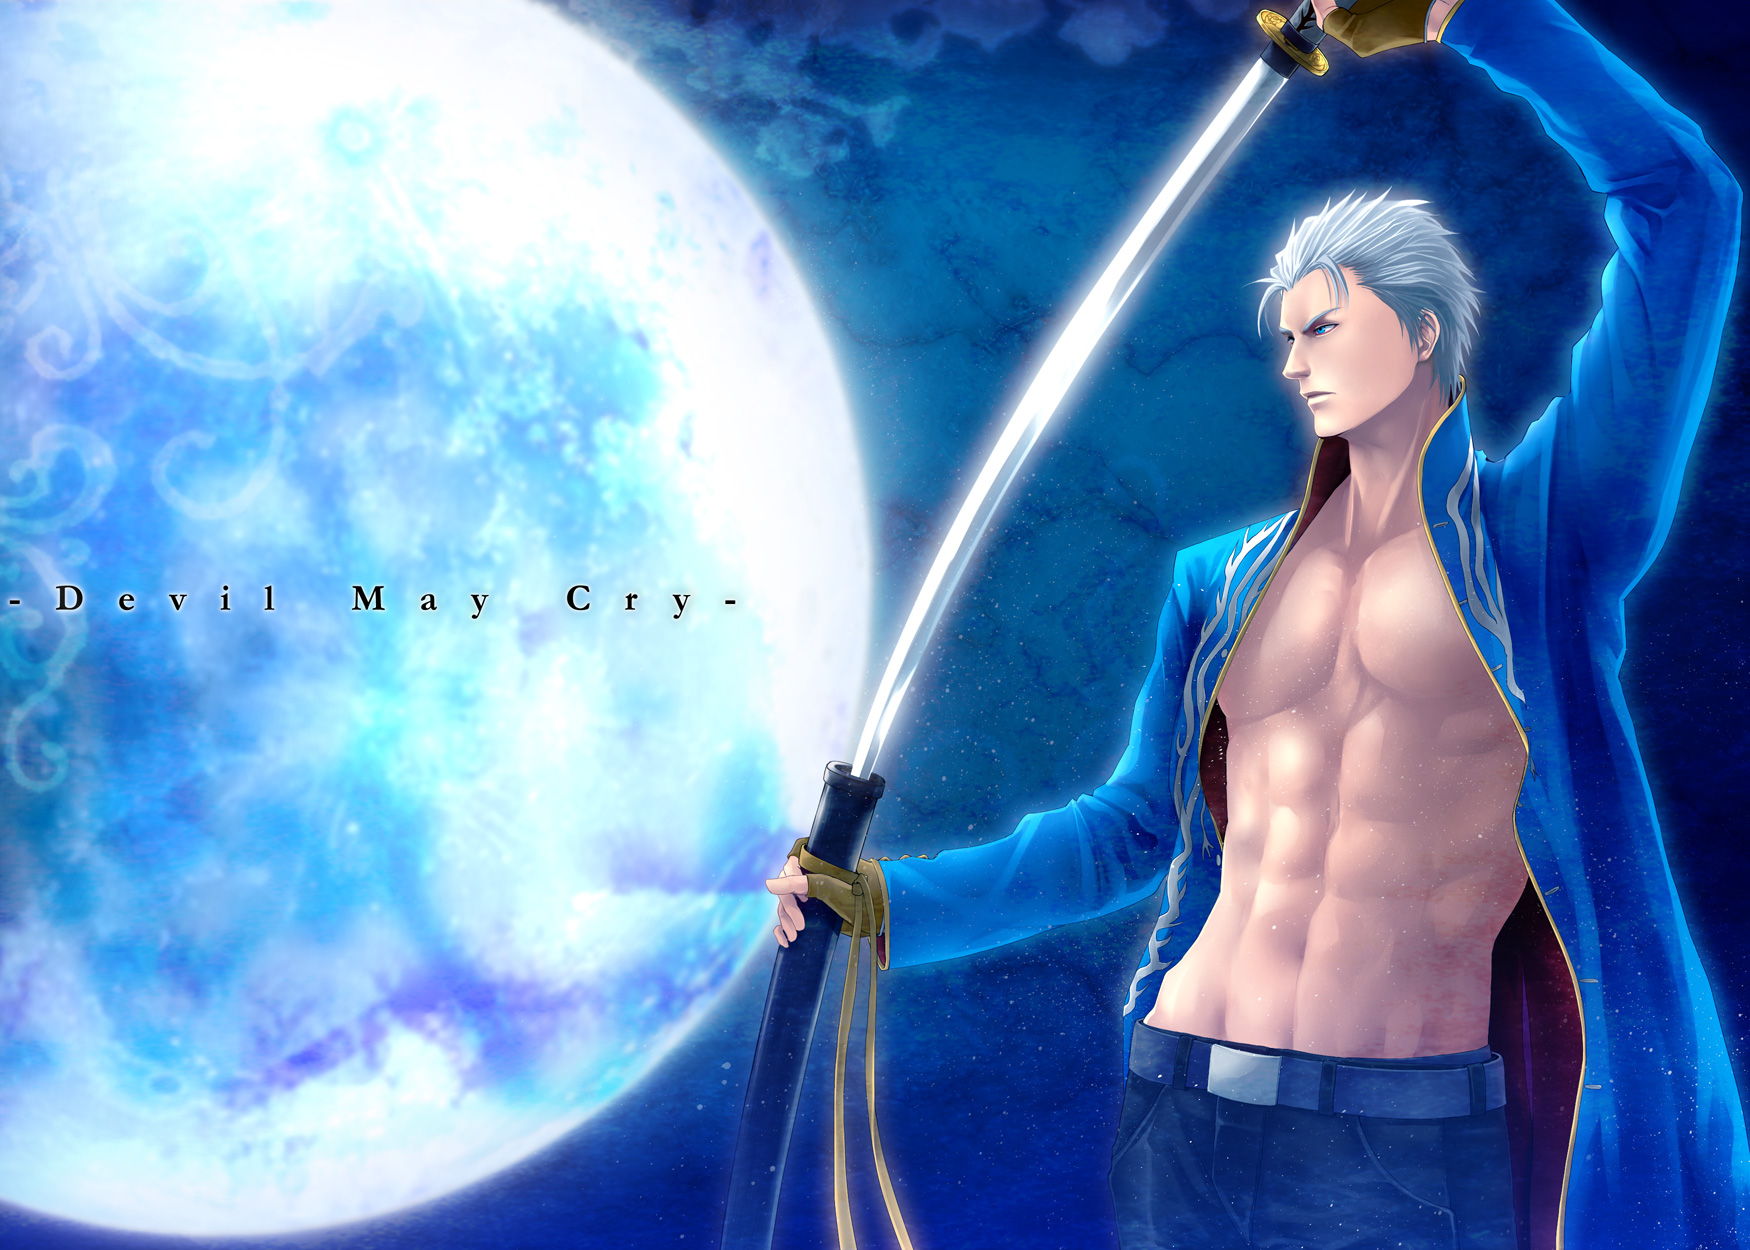 Devil May Cry Vergil wallpaper | 1750x1250 | 122628 | WallpaperUP